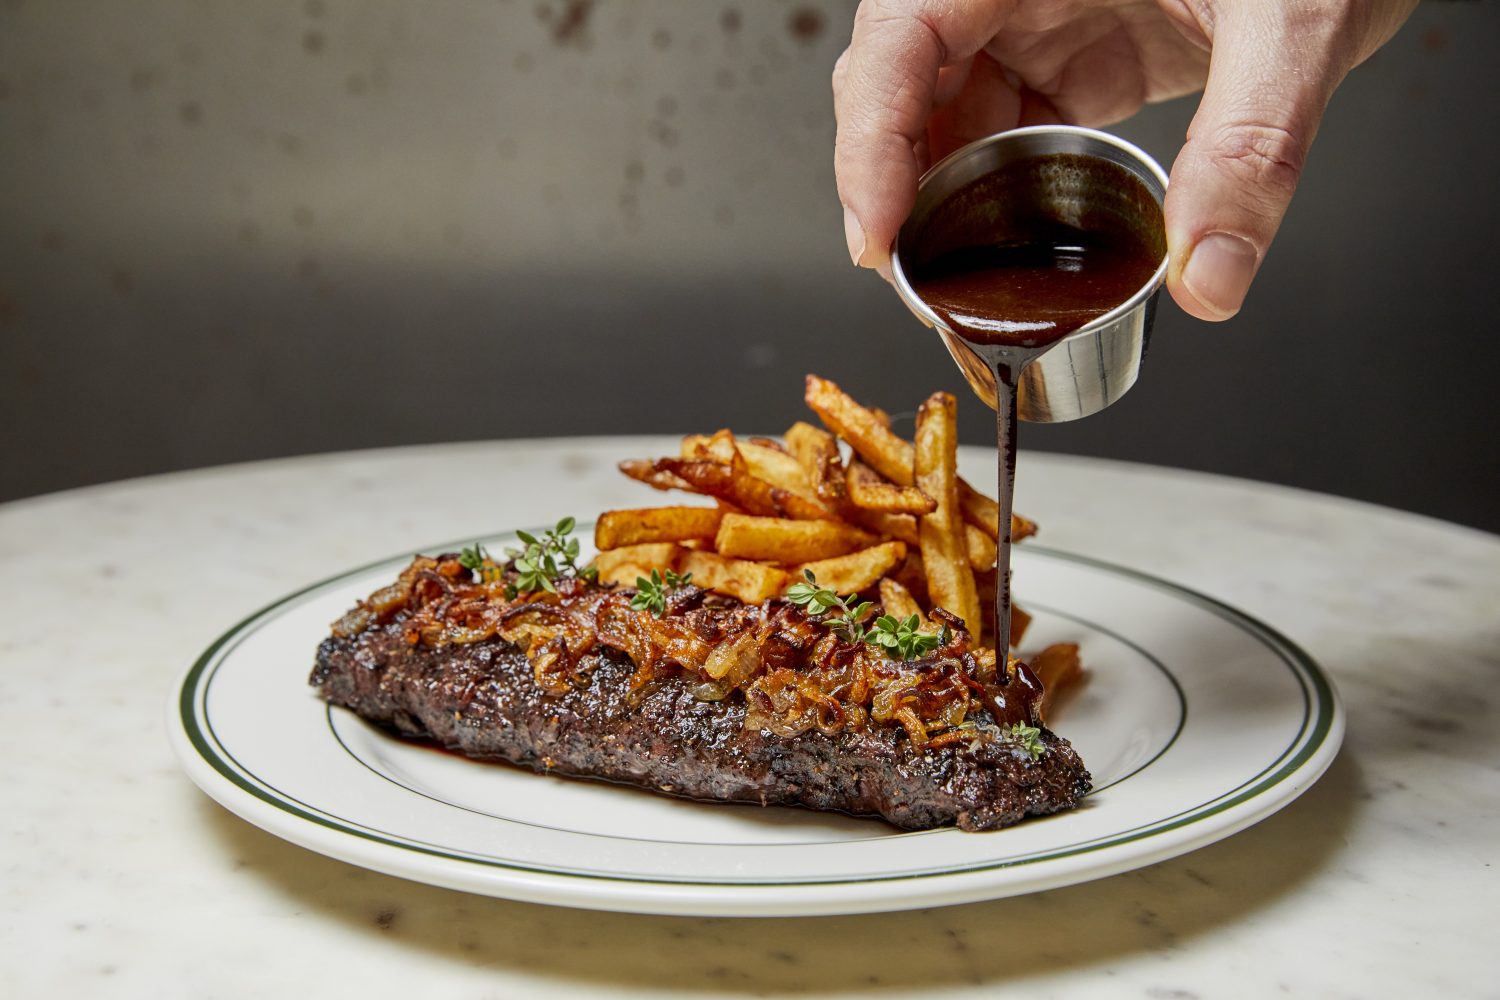 Steak and fries on a plate while sauce is poured on top of it.